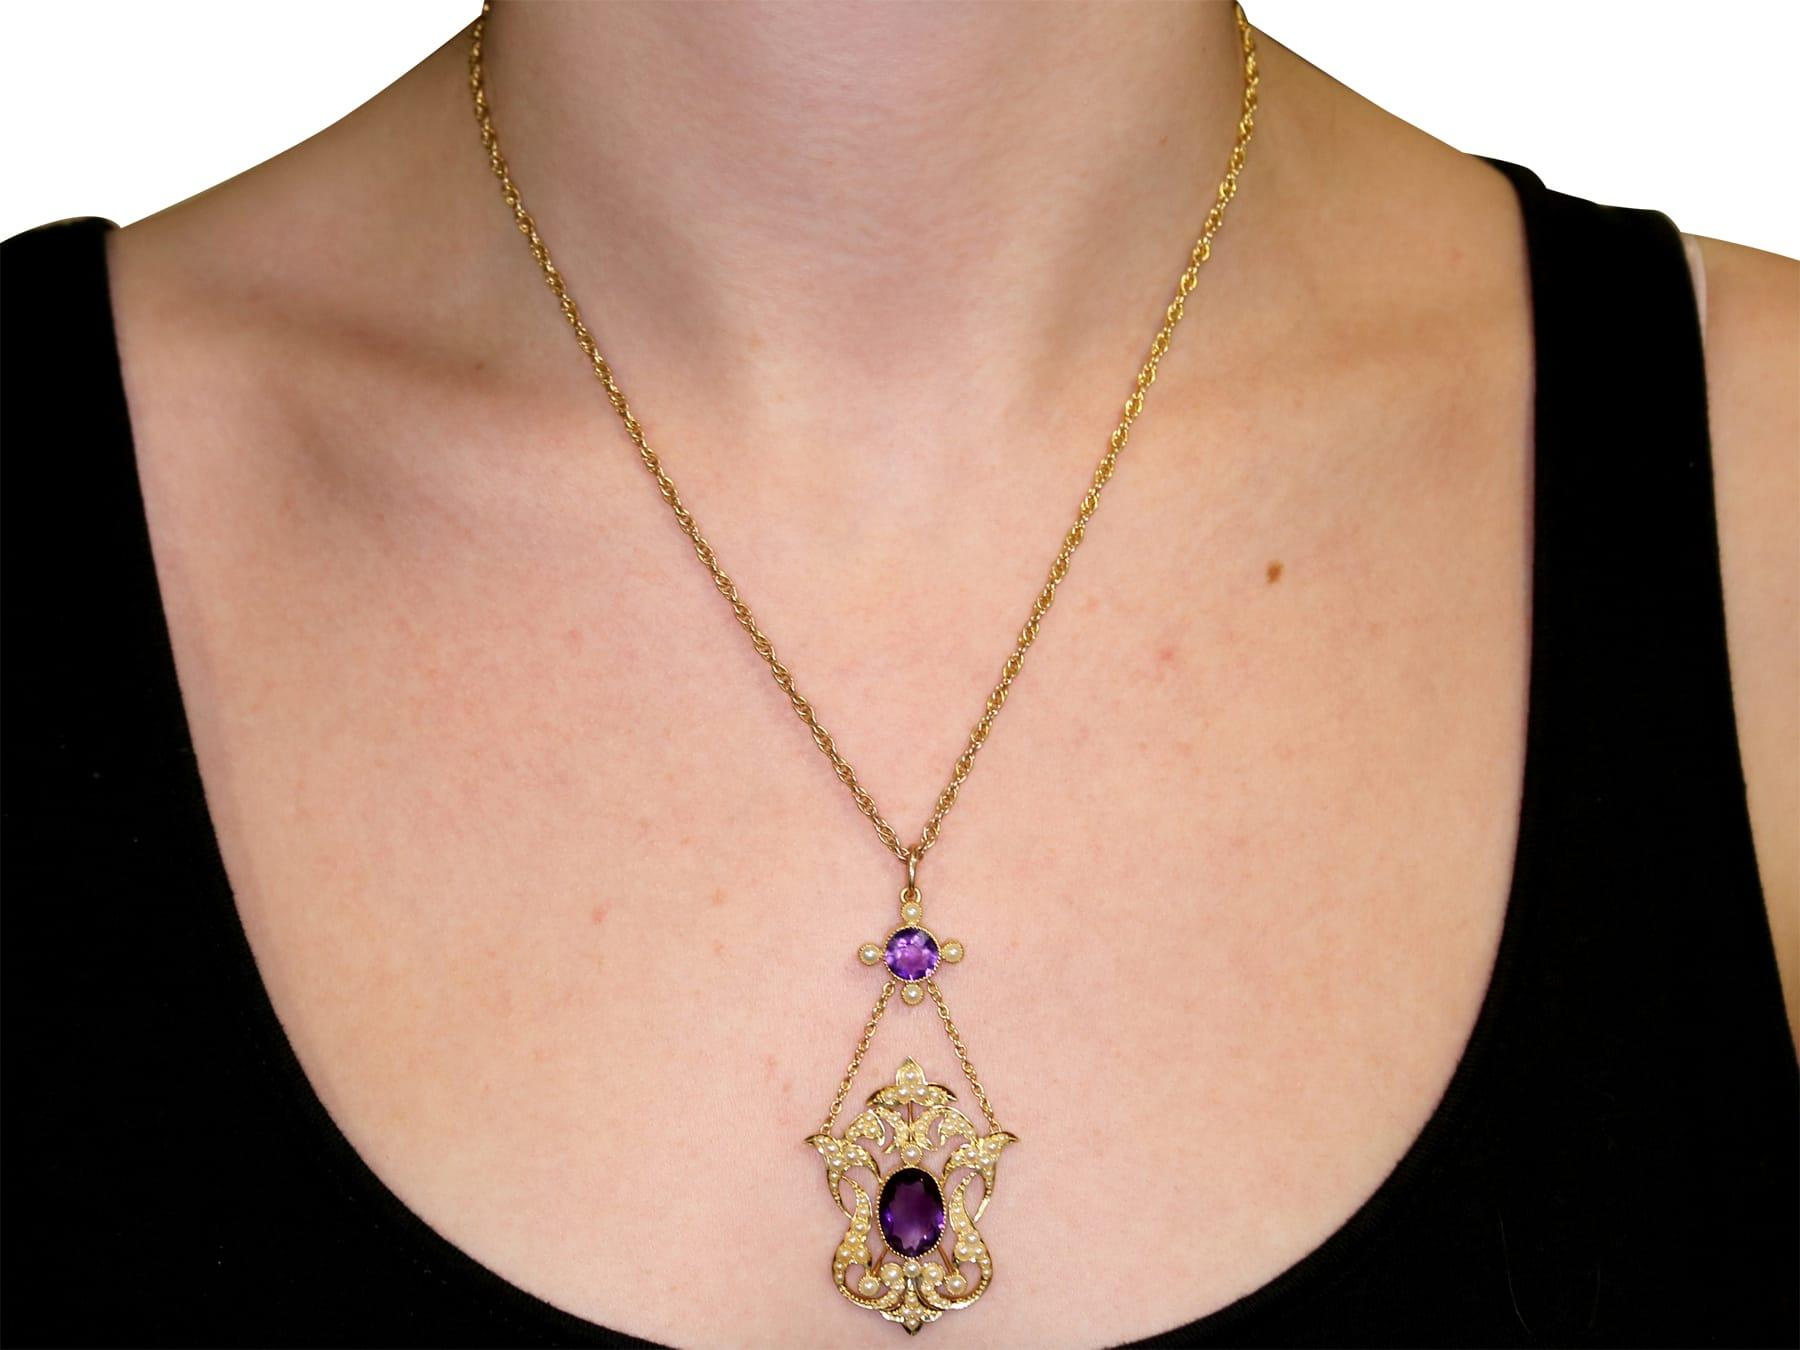 Antique 1910s 4.83 Carat Amethyst and Pearl Yellow Gold Pendant For Sale 1